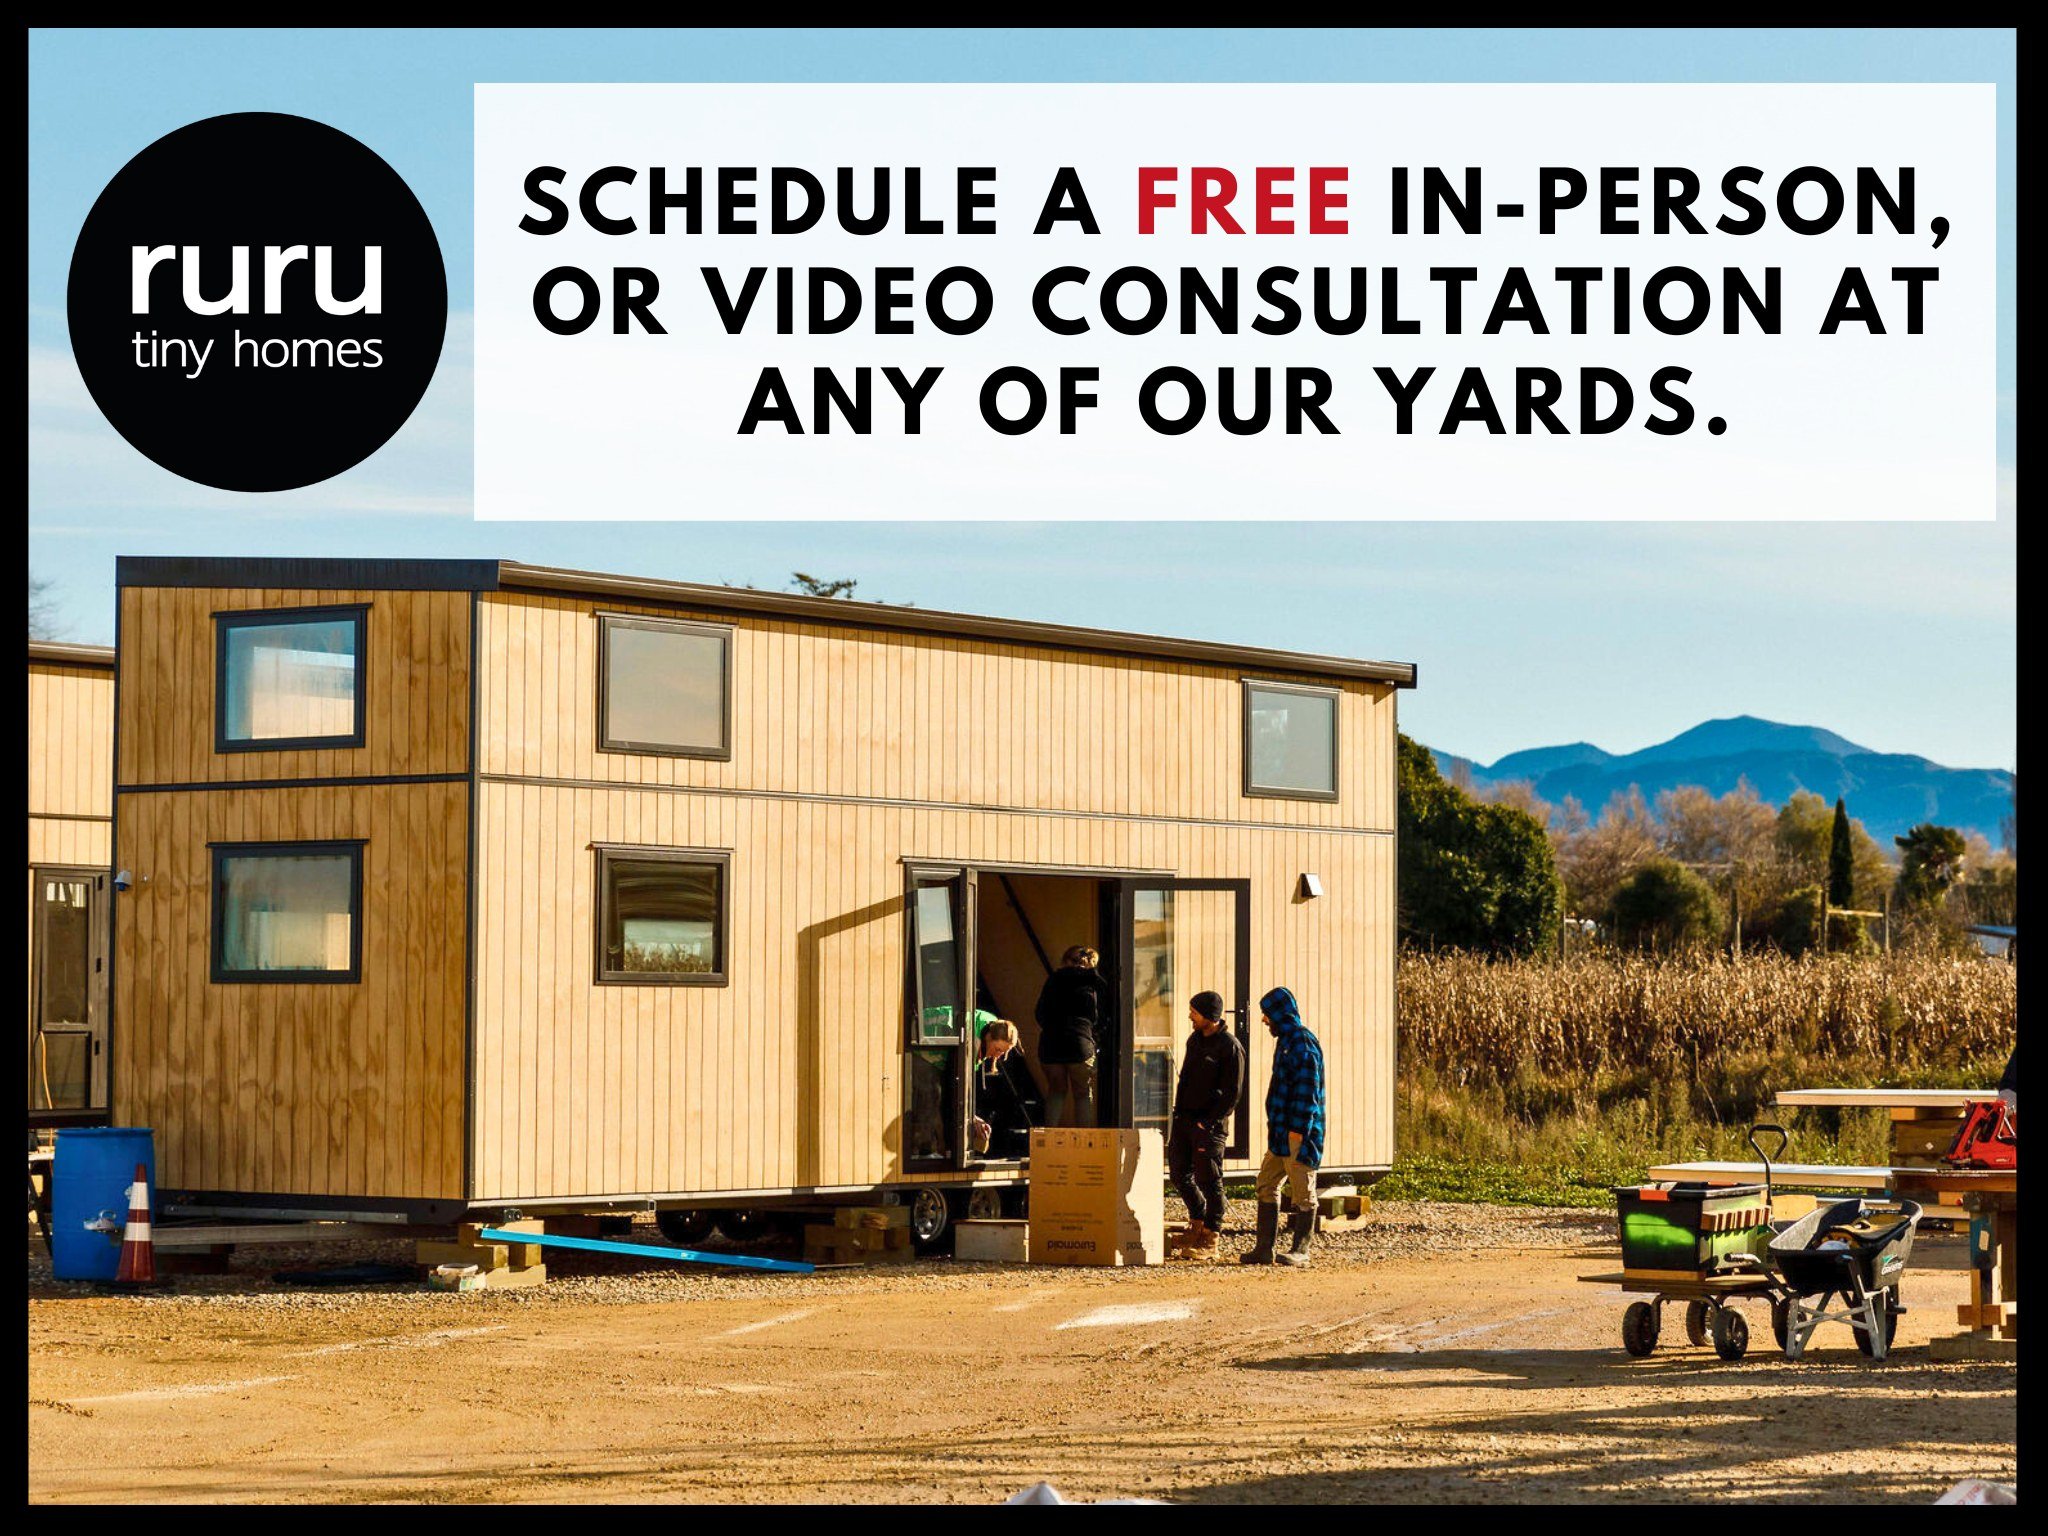 🏡 Interested in exploring the world of tiny homes with Ruru? 🏡

Schedule a one-on-one consultation to discuss all things tiny homes, including FREE COUNCIL GUIDANCE, and find the perfect option just for you! Whether you're dreaming of downsizing, e